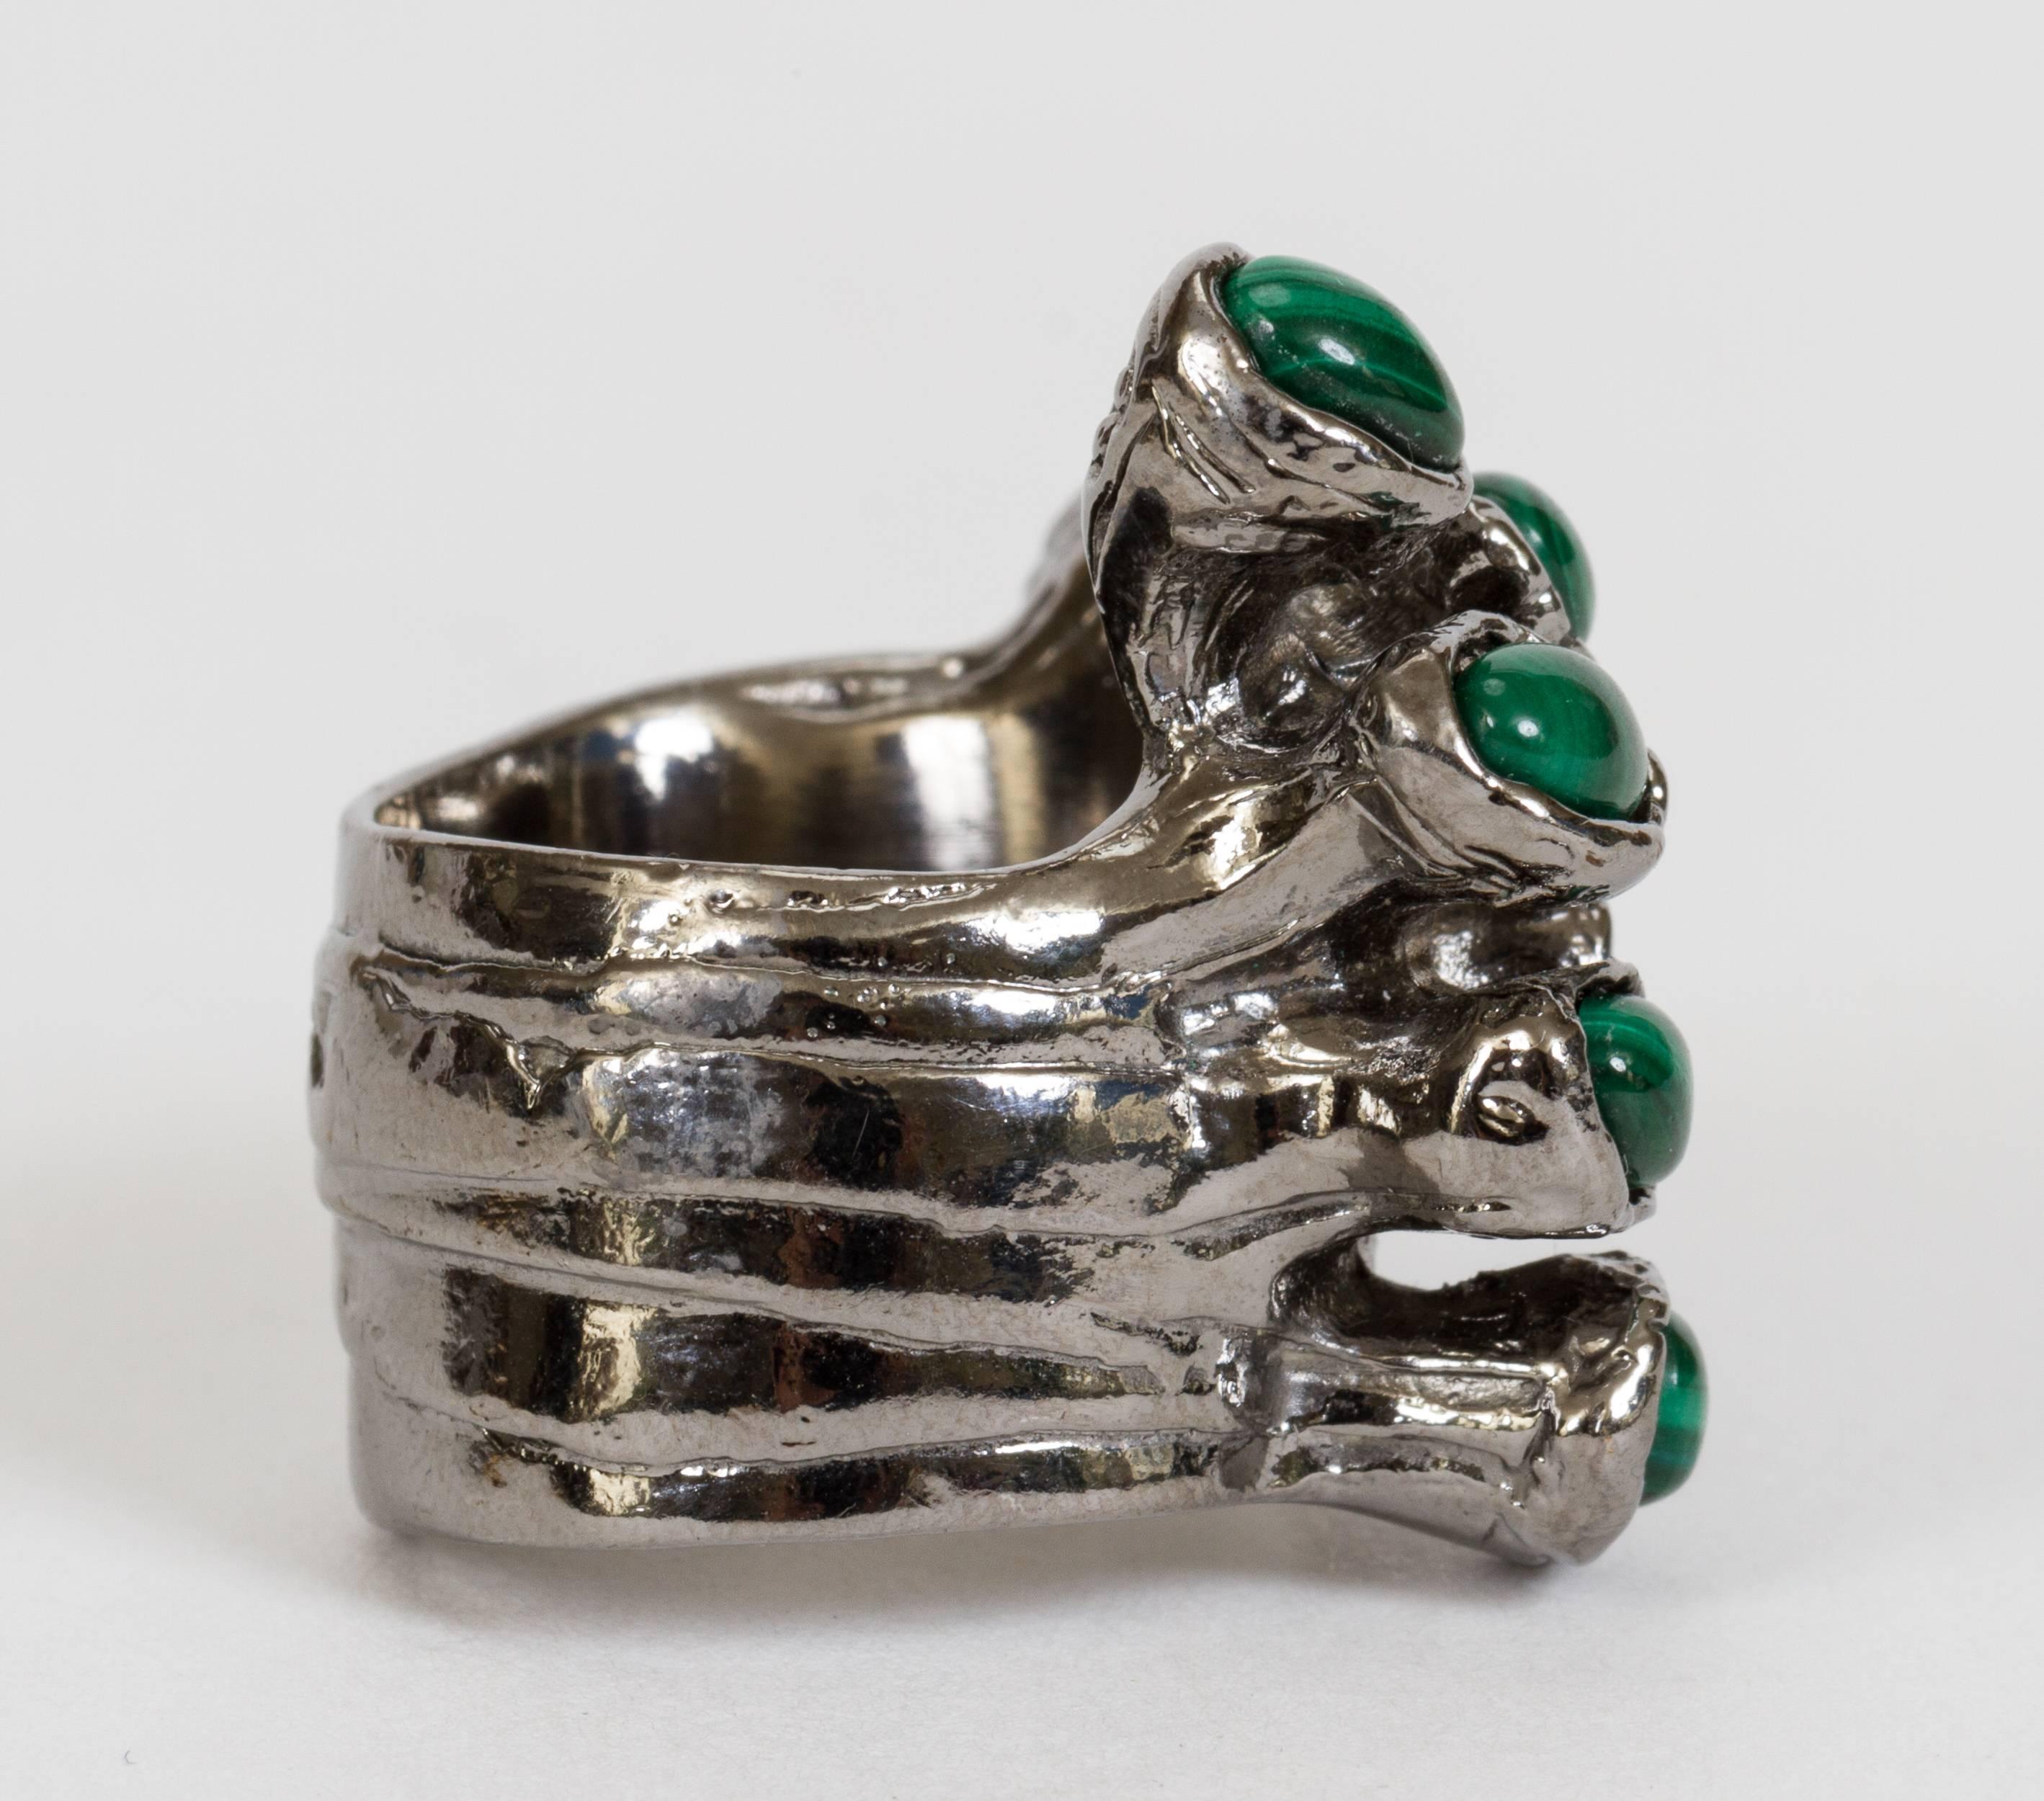 Yves Saint Laurent contemporary Silver-plated malachite ring with wide band. Size: 6.5. Comes in velvet pouch. Minimal wear.